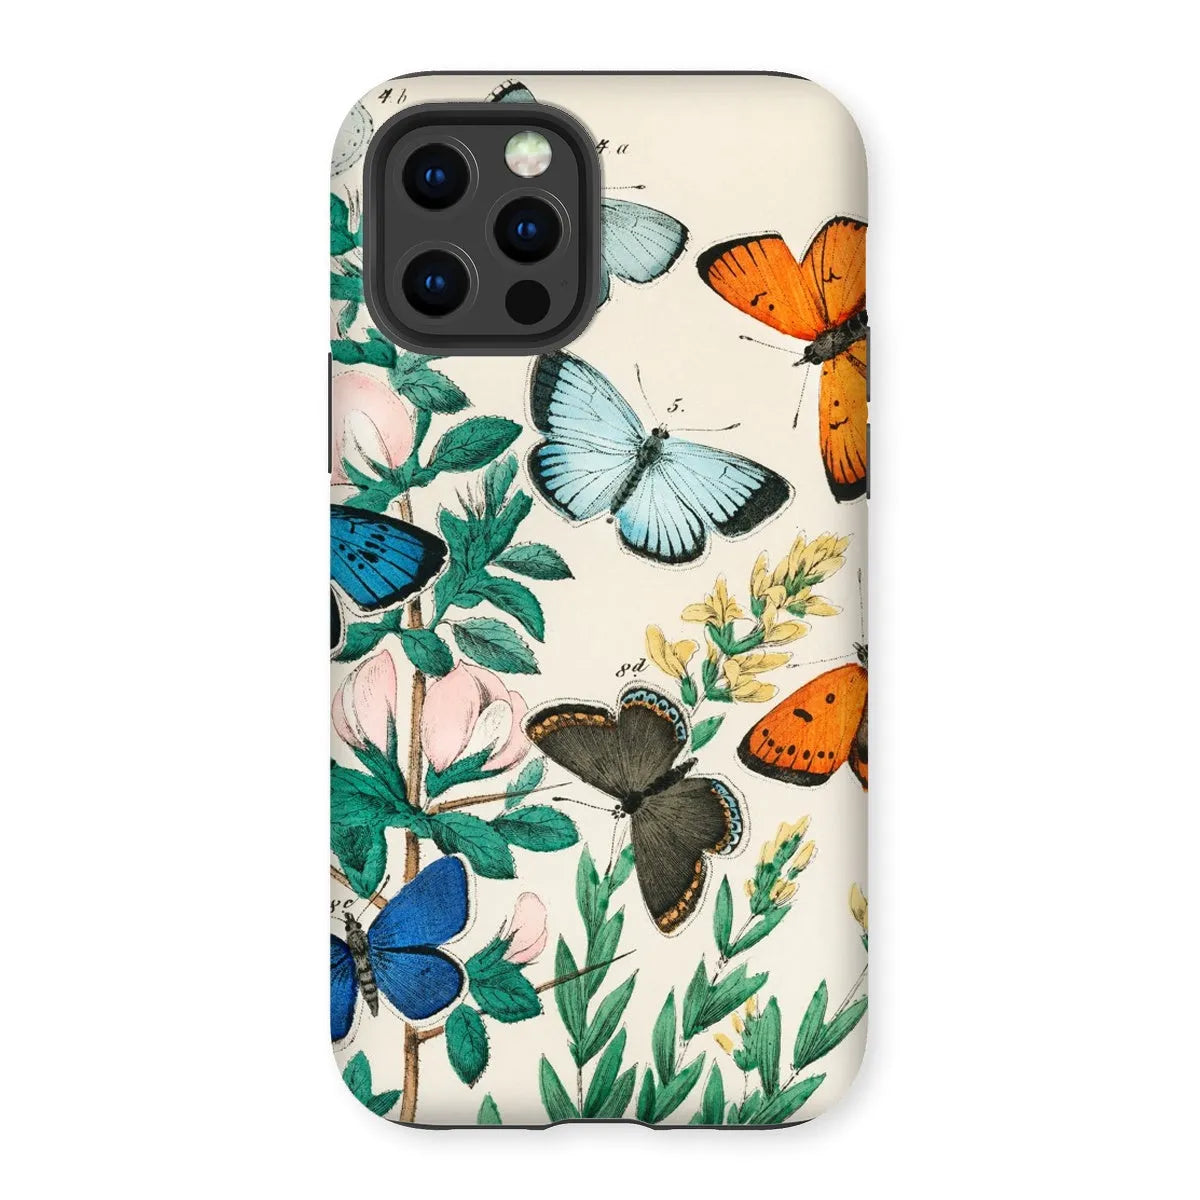 European Butterflies And Moths Art Phone Case - William Forsell Kirby - Iphone 12 Pro / Matte - Mobile Phone Cases